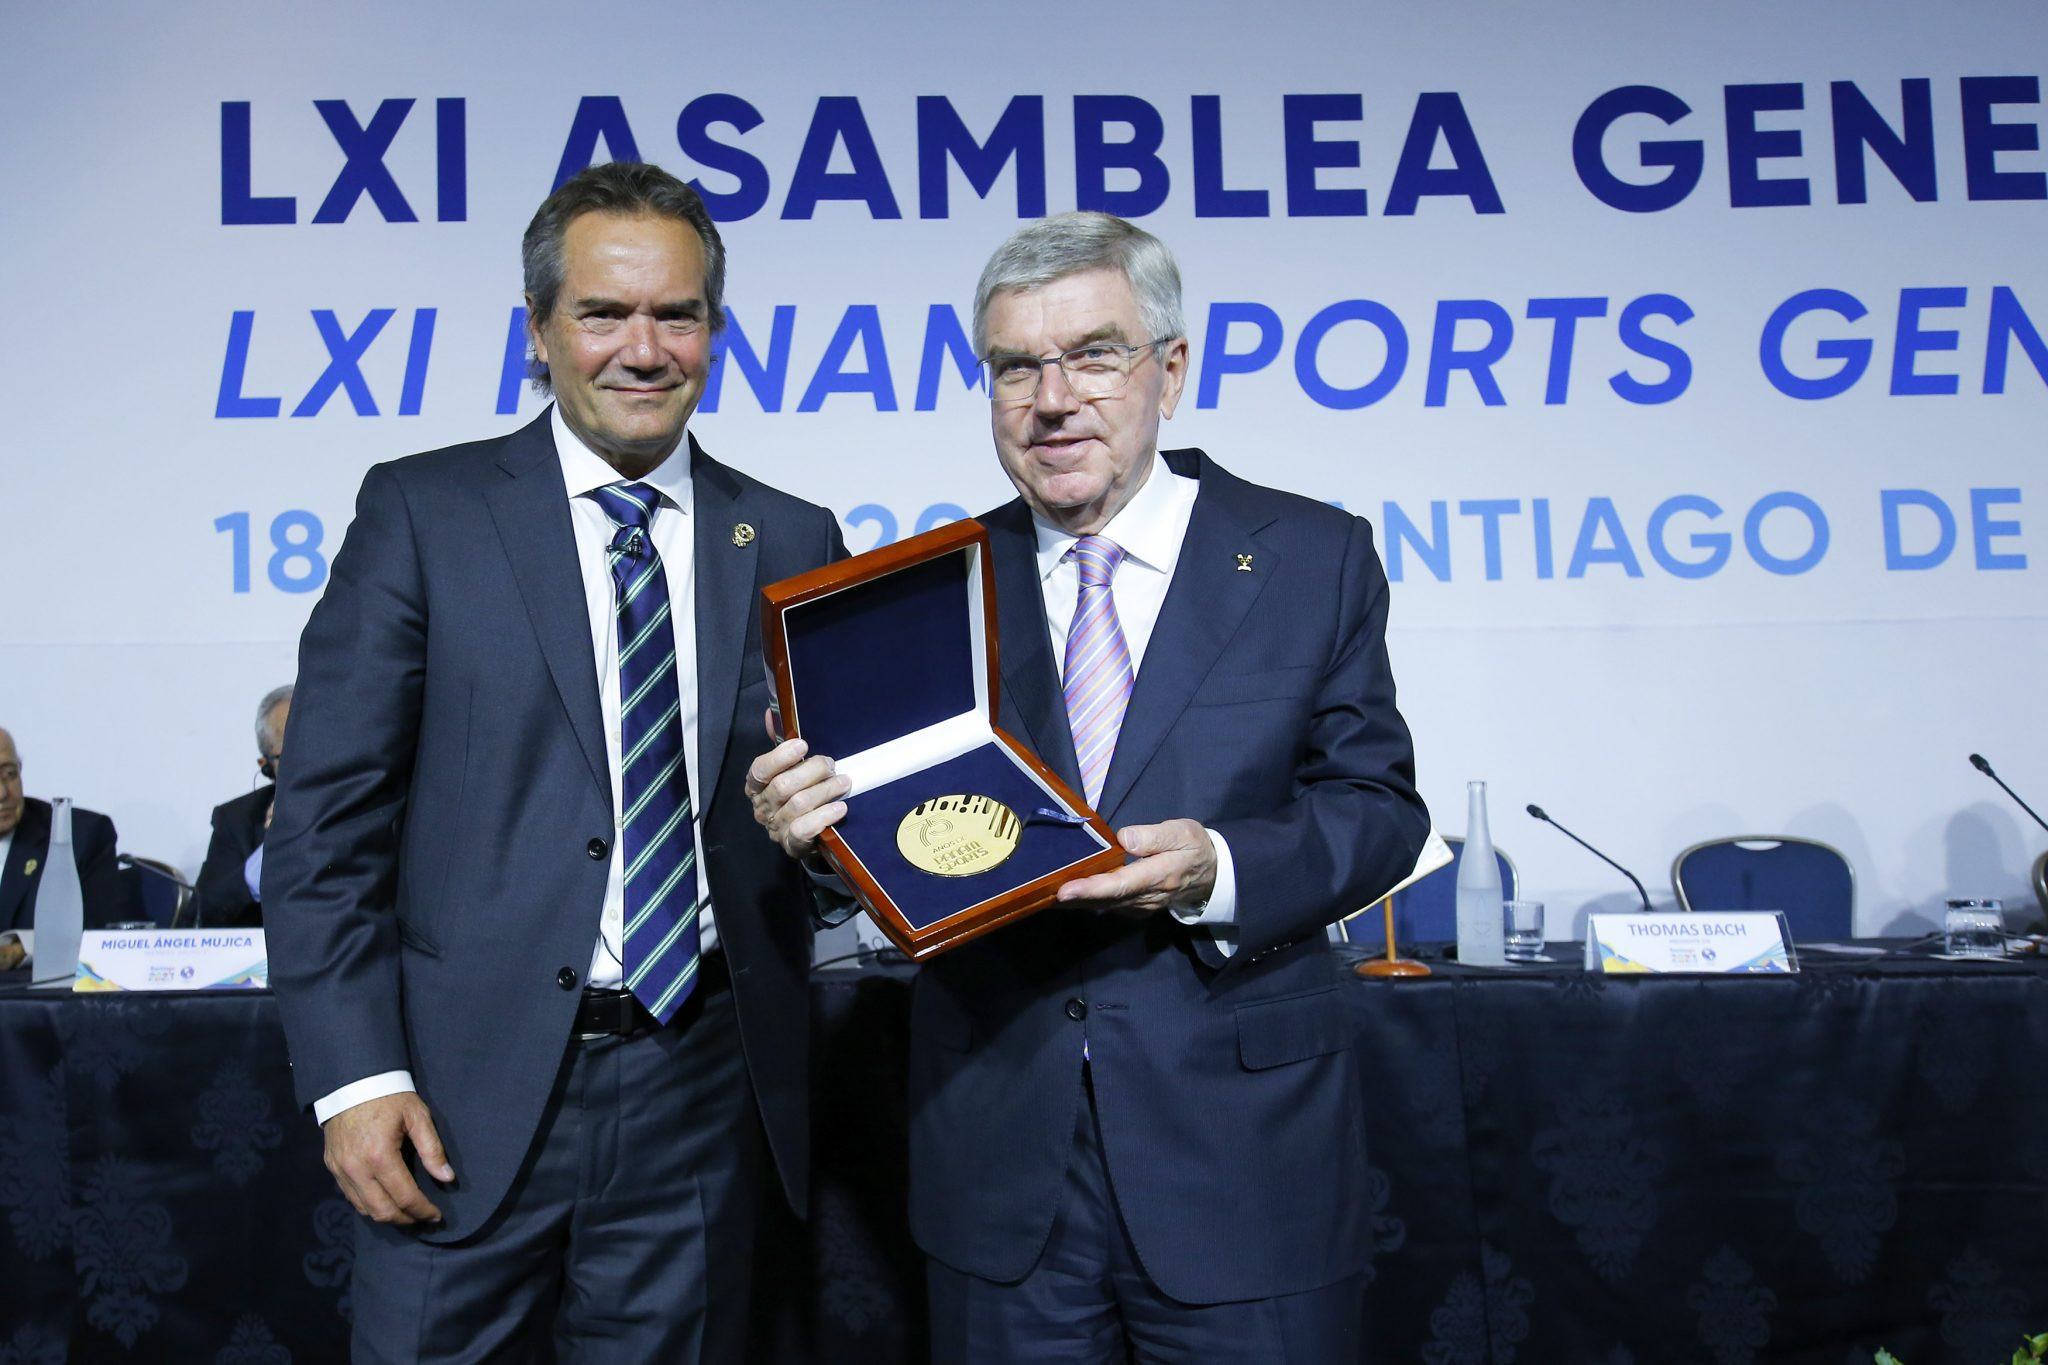 Bach receives plaque after attending Panam Sports General Assembly